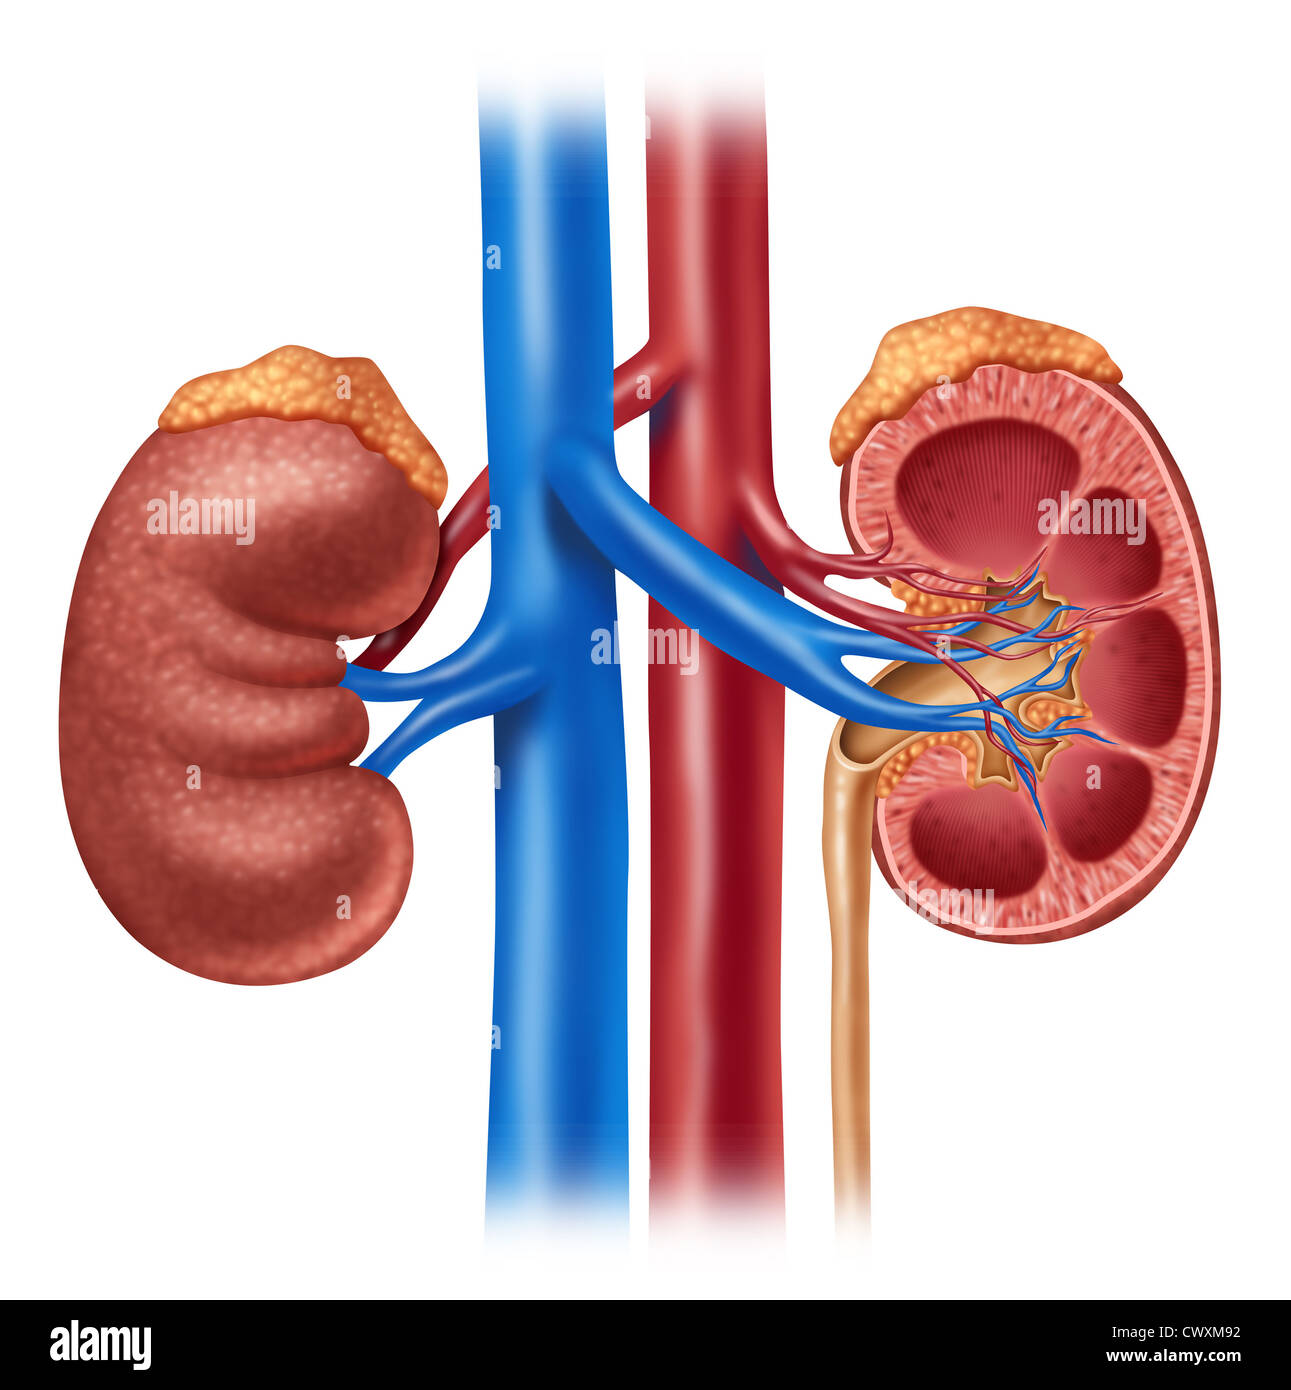 Human kidney medical diagram with a cross section of the inner organ with red and blue arteries and adrenal gland as a hrealth care and medical illustration of the inside anatomy of the urinary system isolated on a white background. Stock Photo